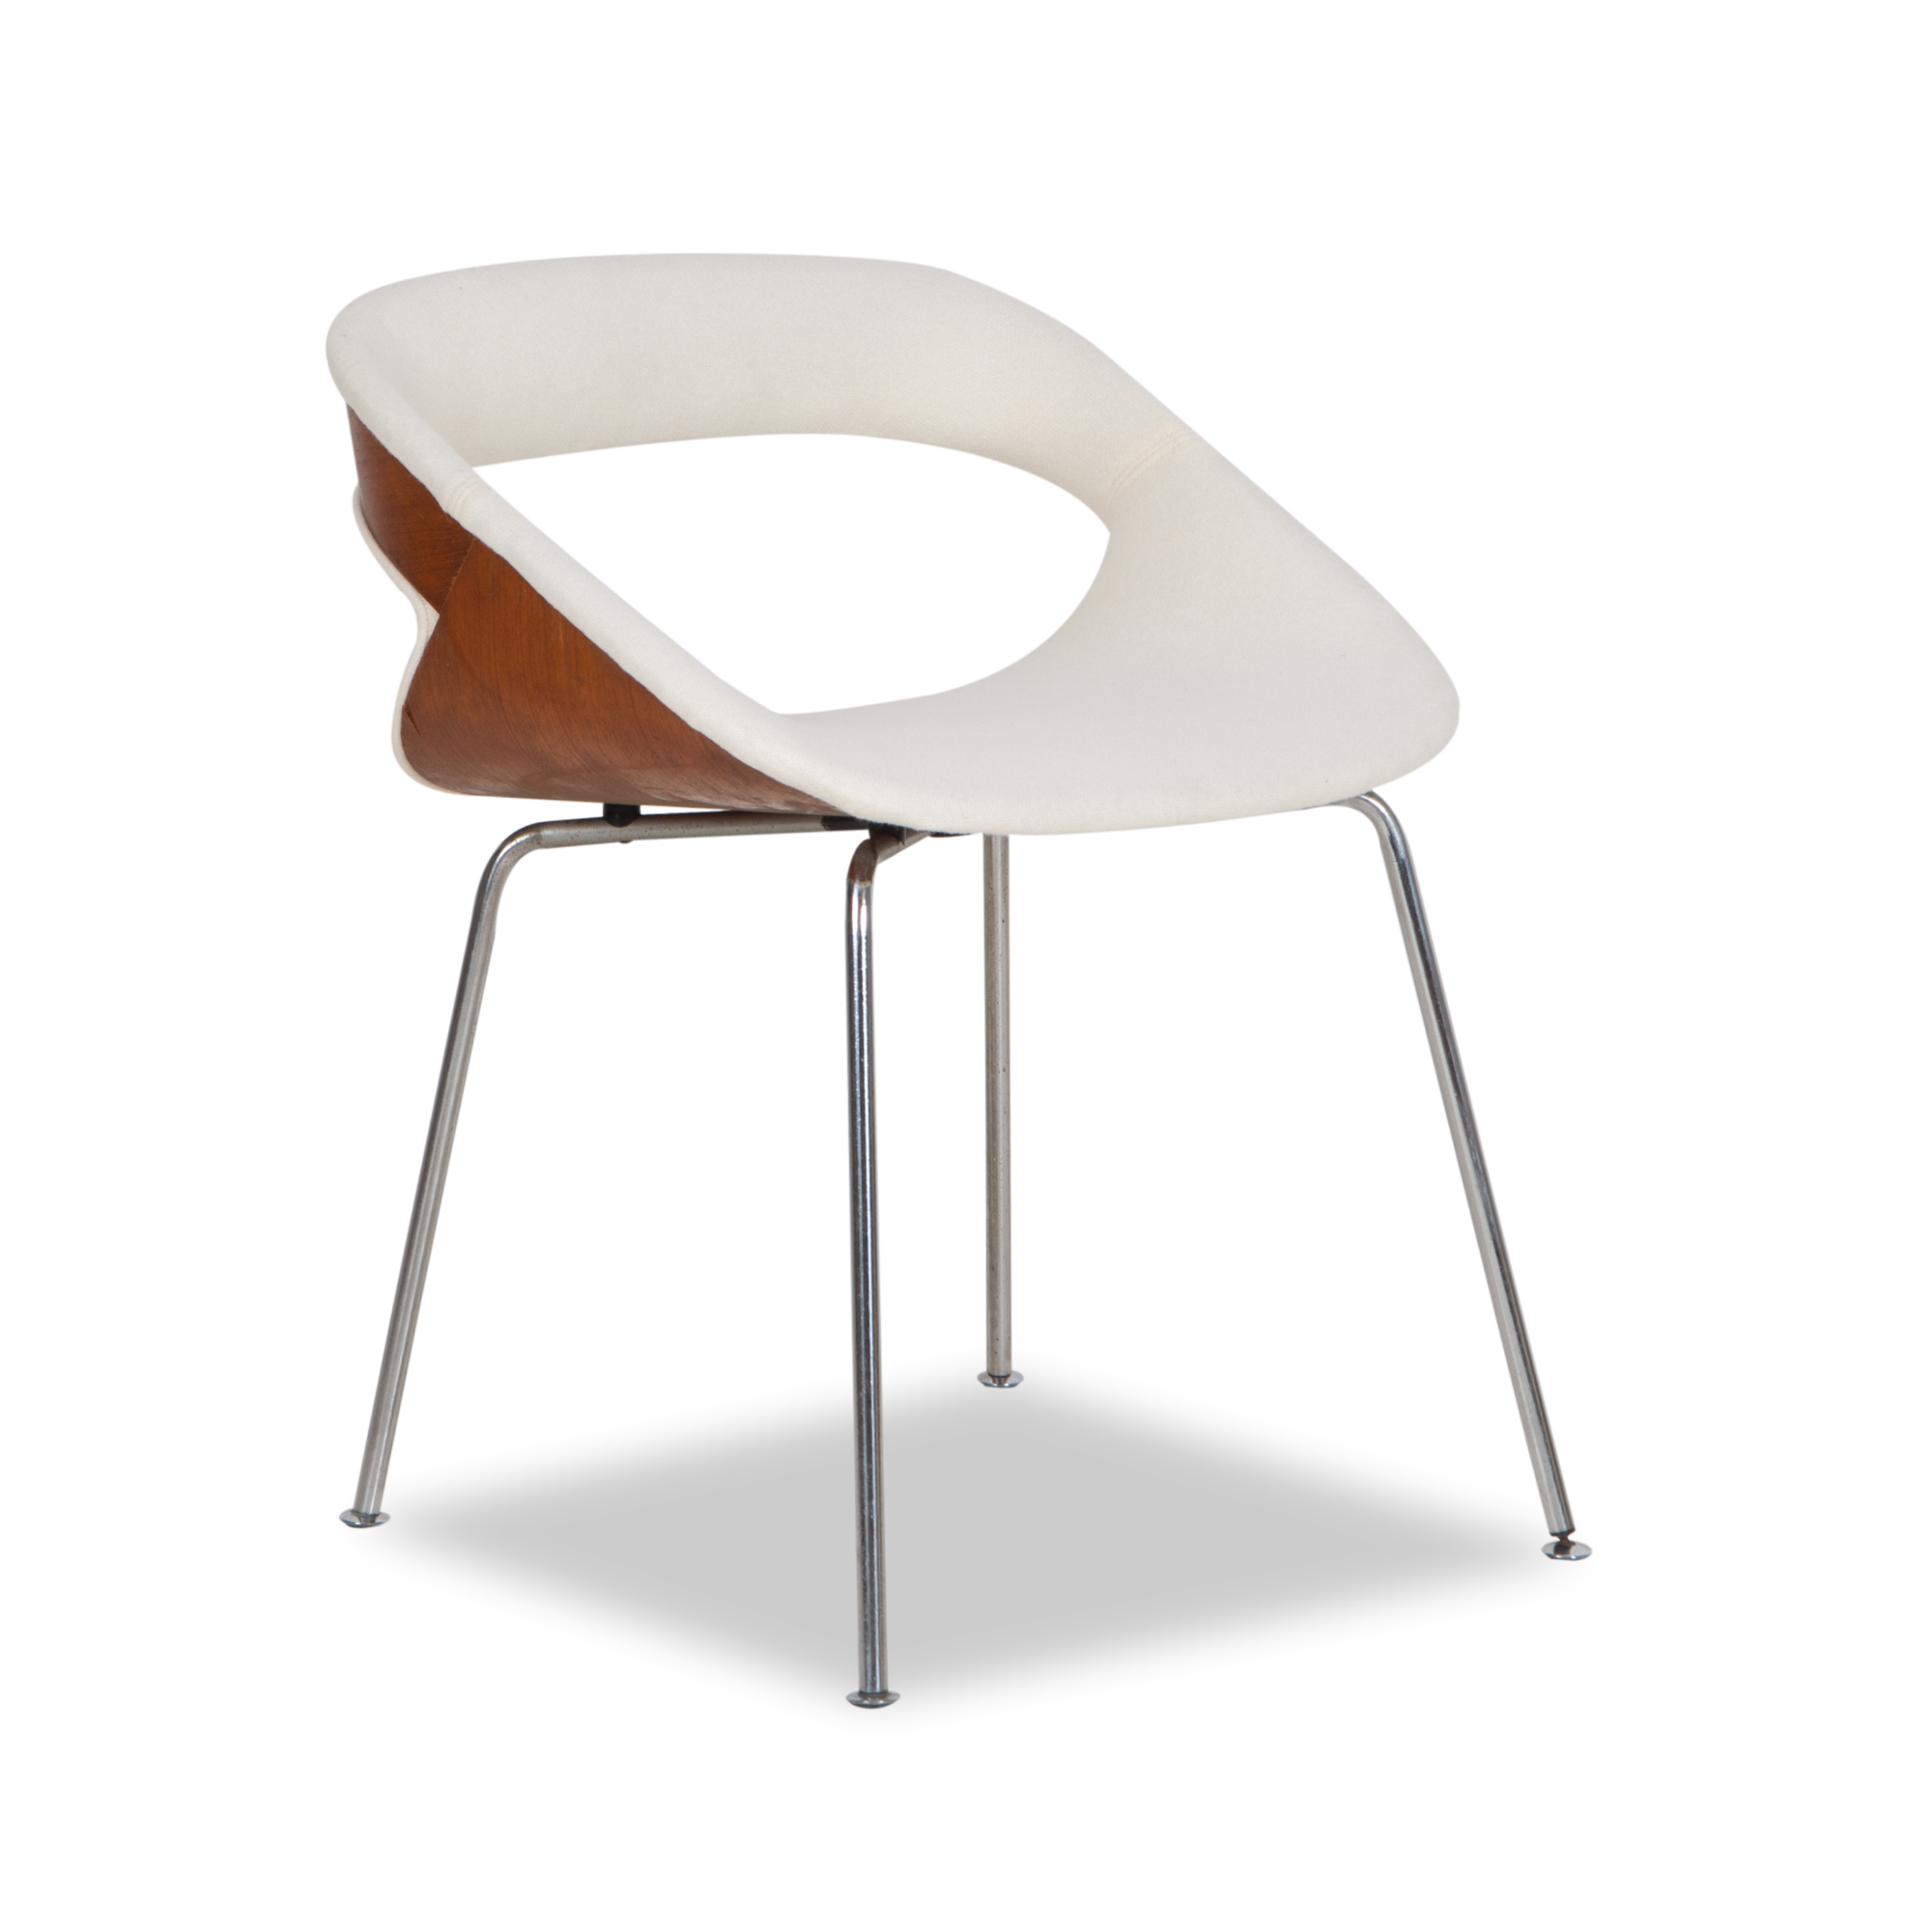 An early example of mixed-materials styling, this vintage Model 130 Dining Chair was designed by Geoffrey Harcourt and manufactured by Artifort, circa 1960s.